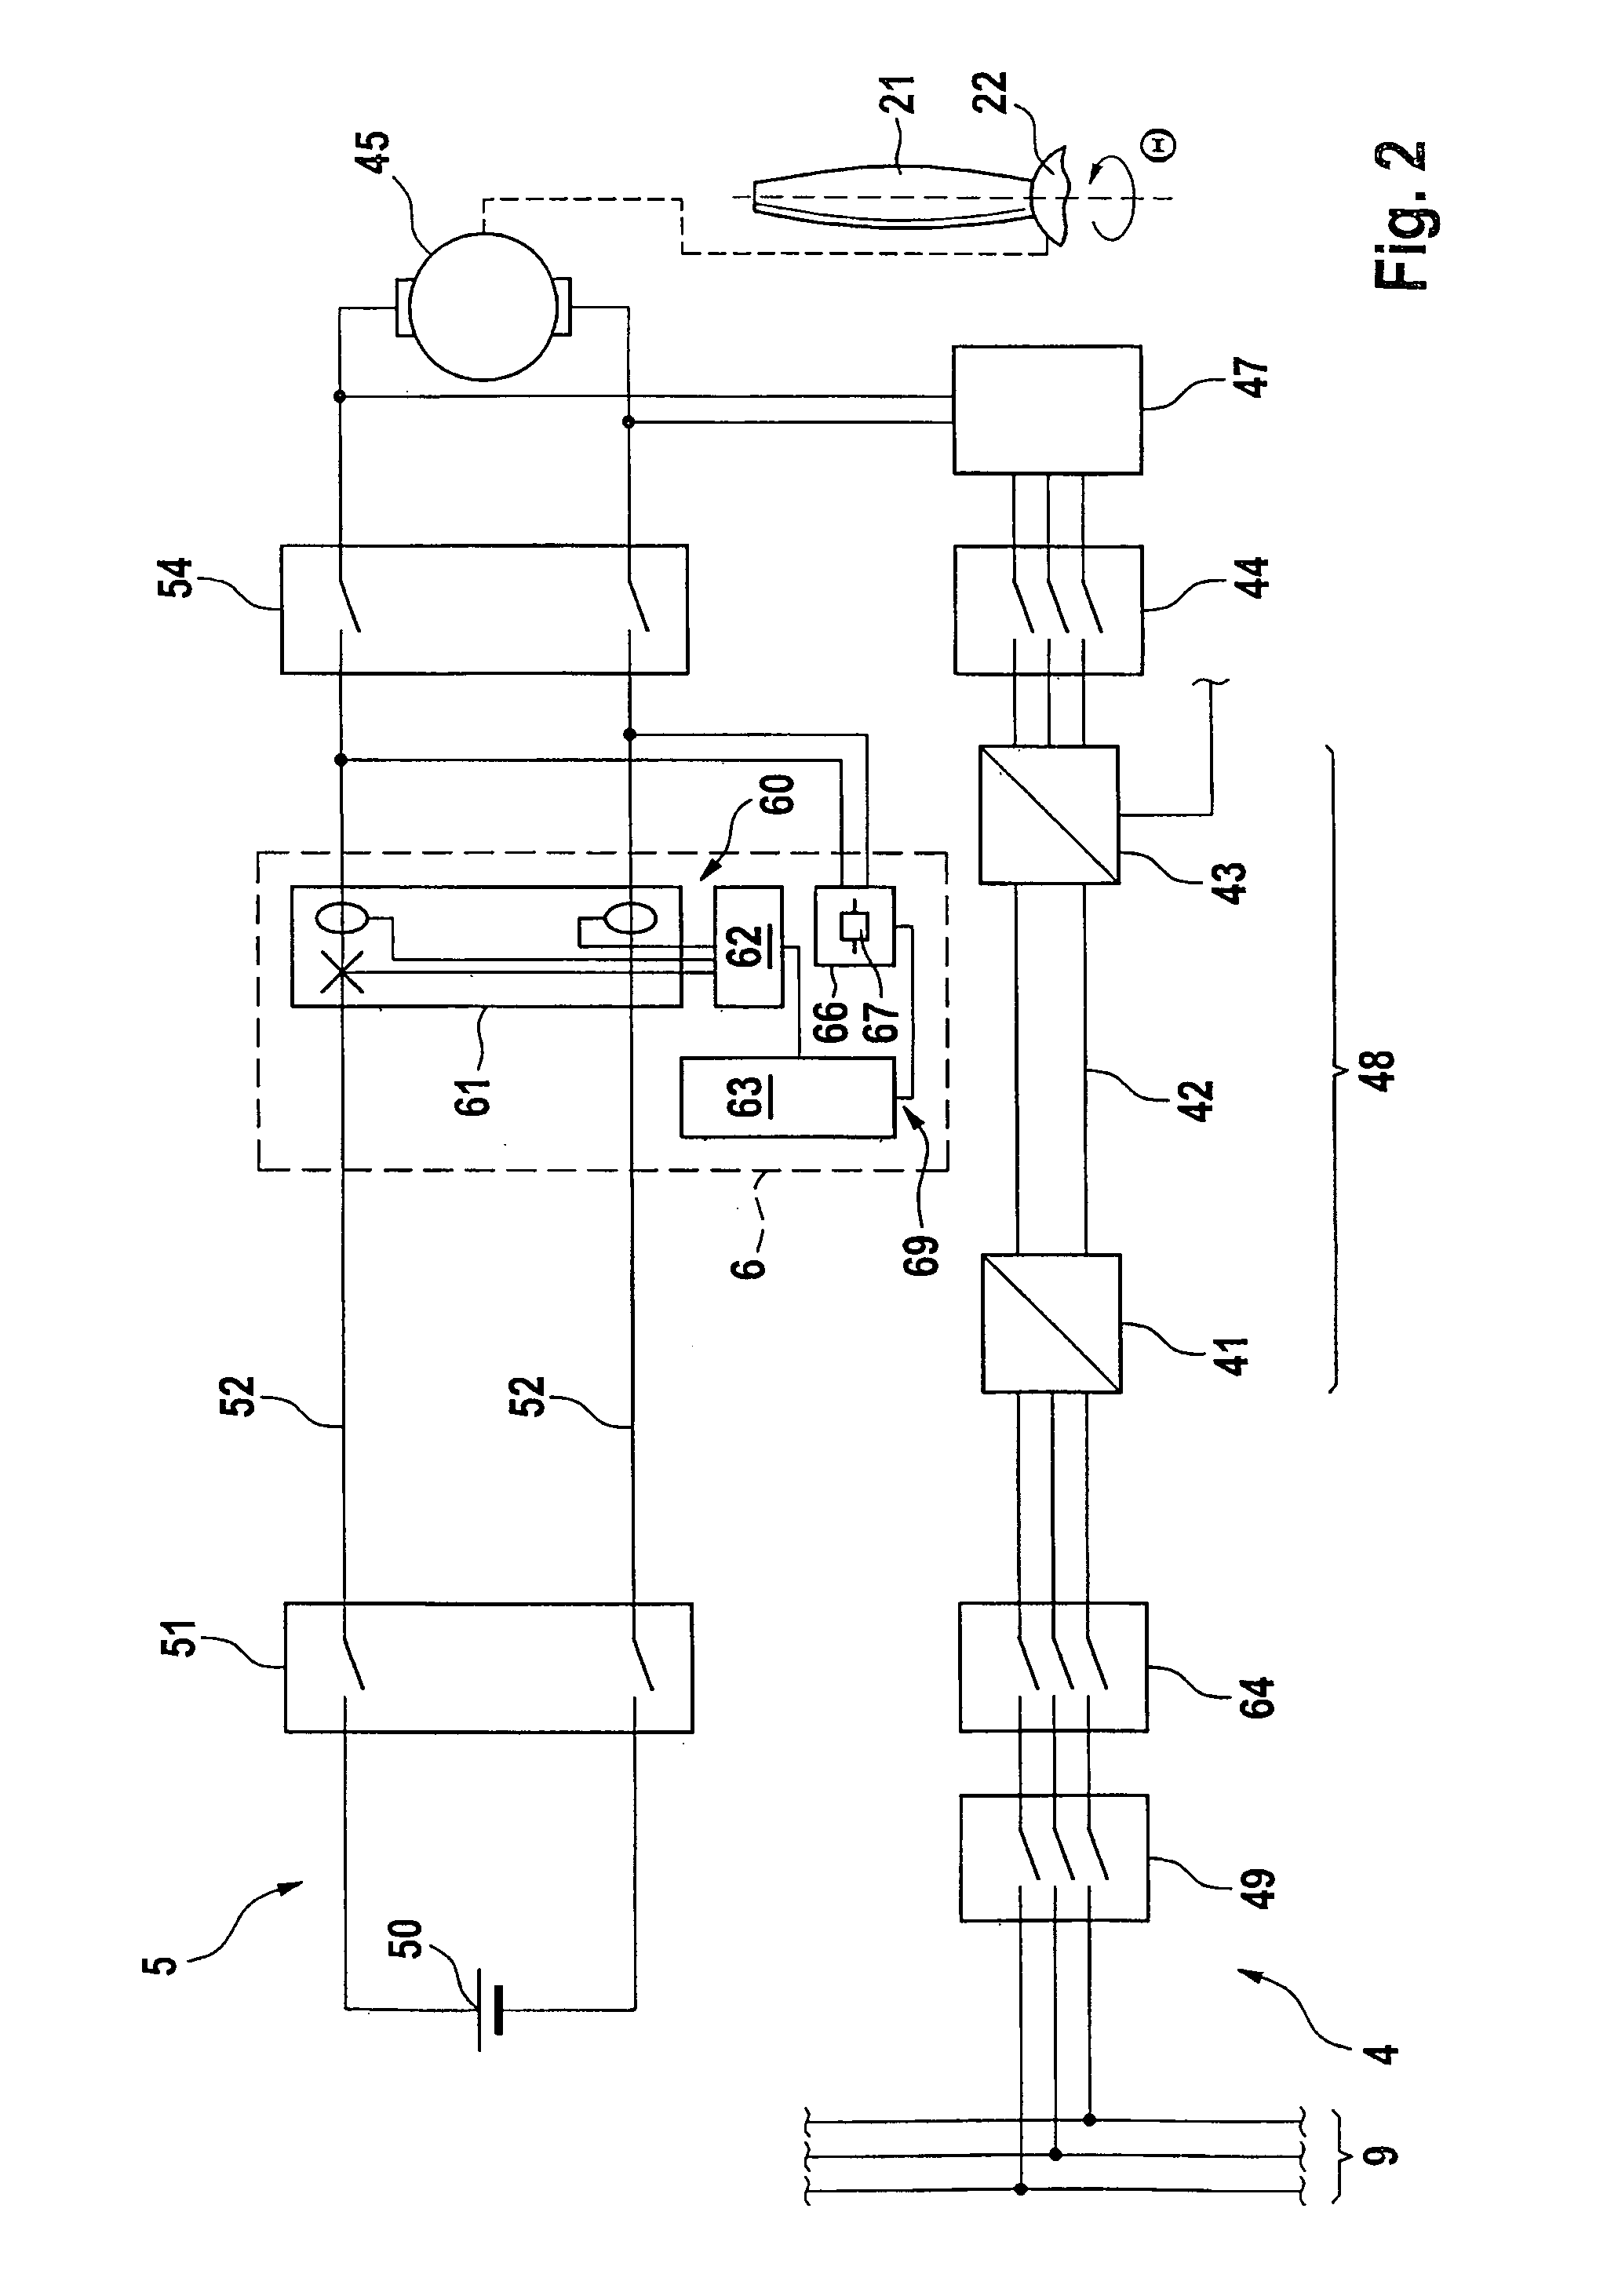 Energy supply for a blade adjustment device pertaining to a wind energy installation